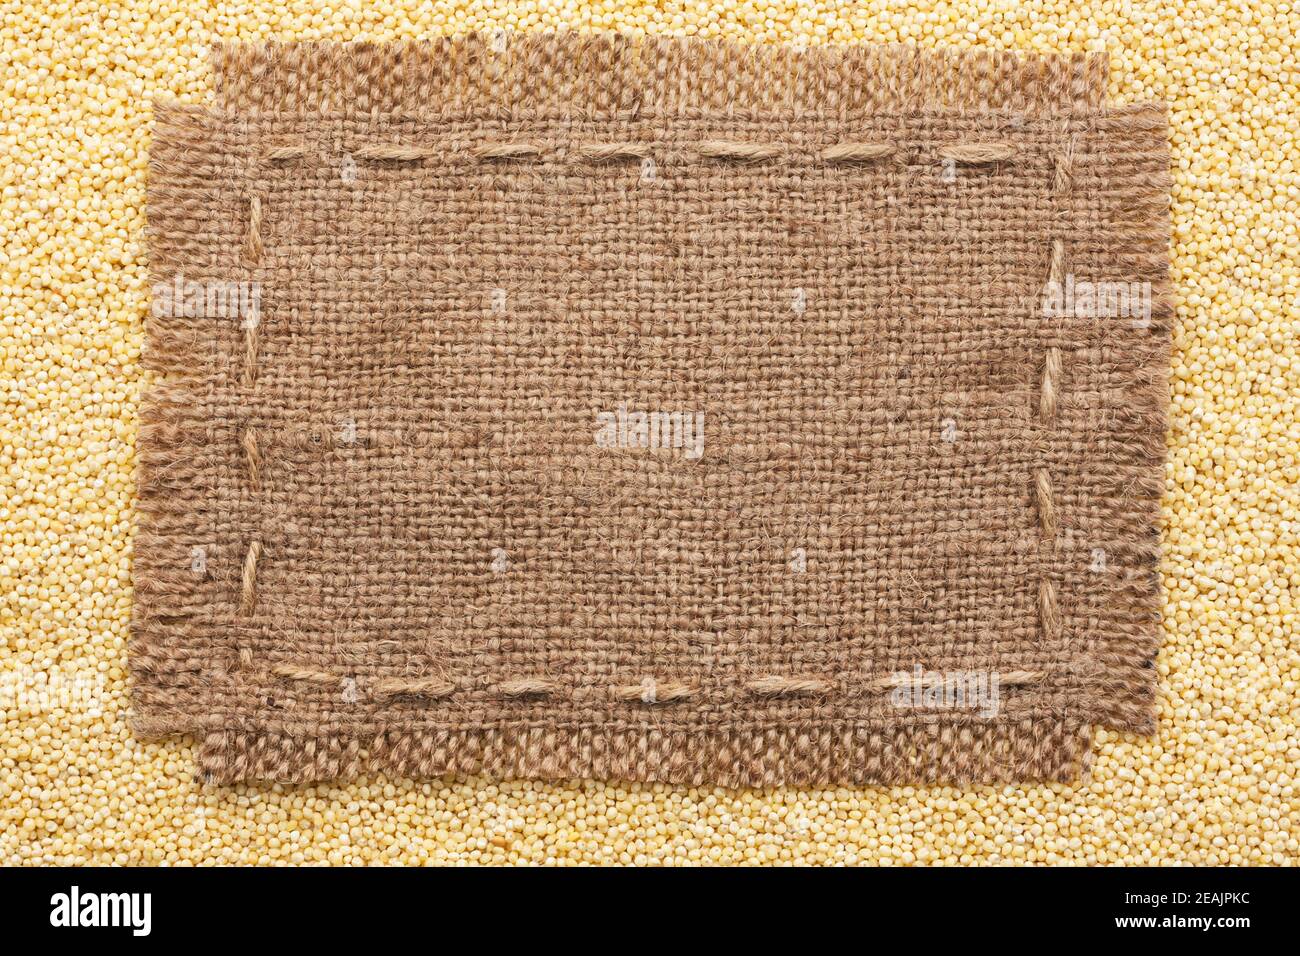 Frame of burlap  lying on a millet  background Stock Photo